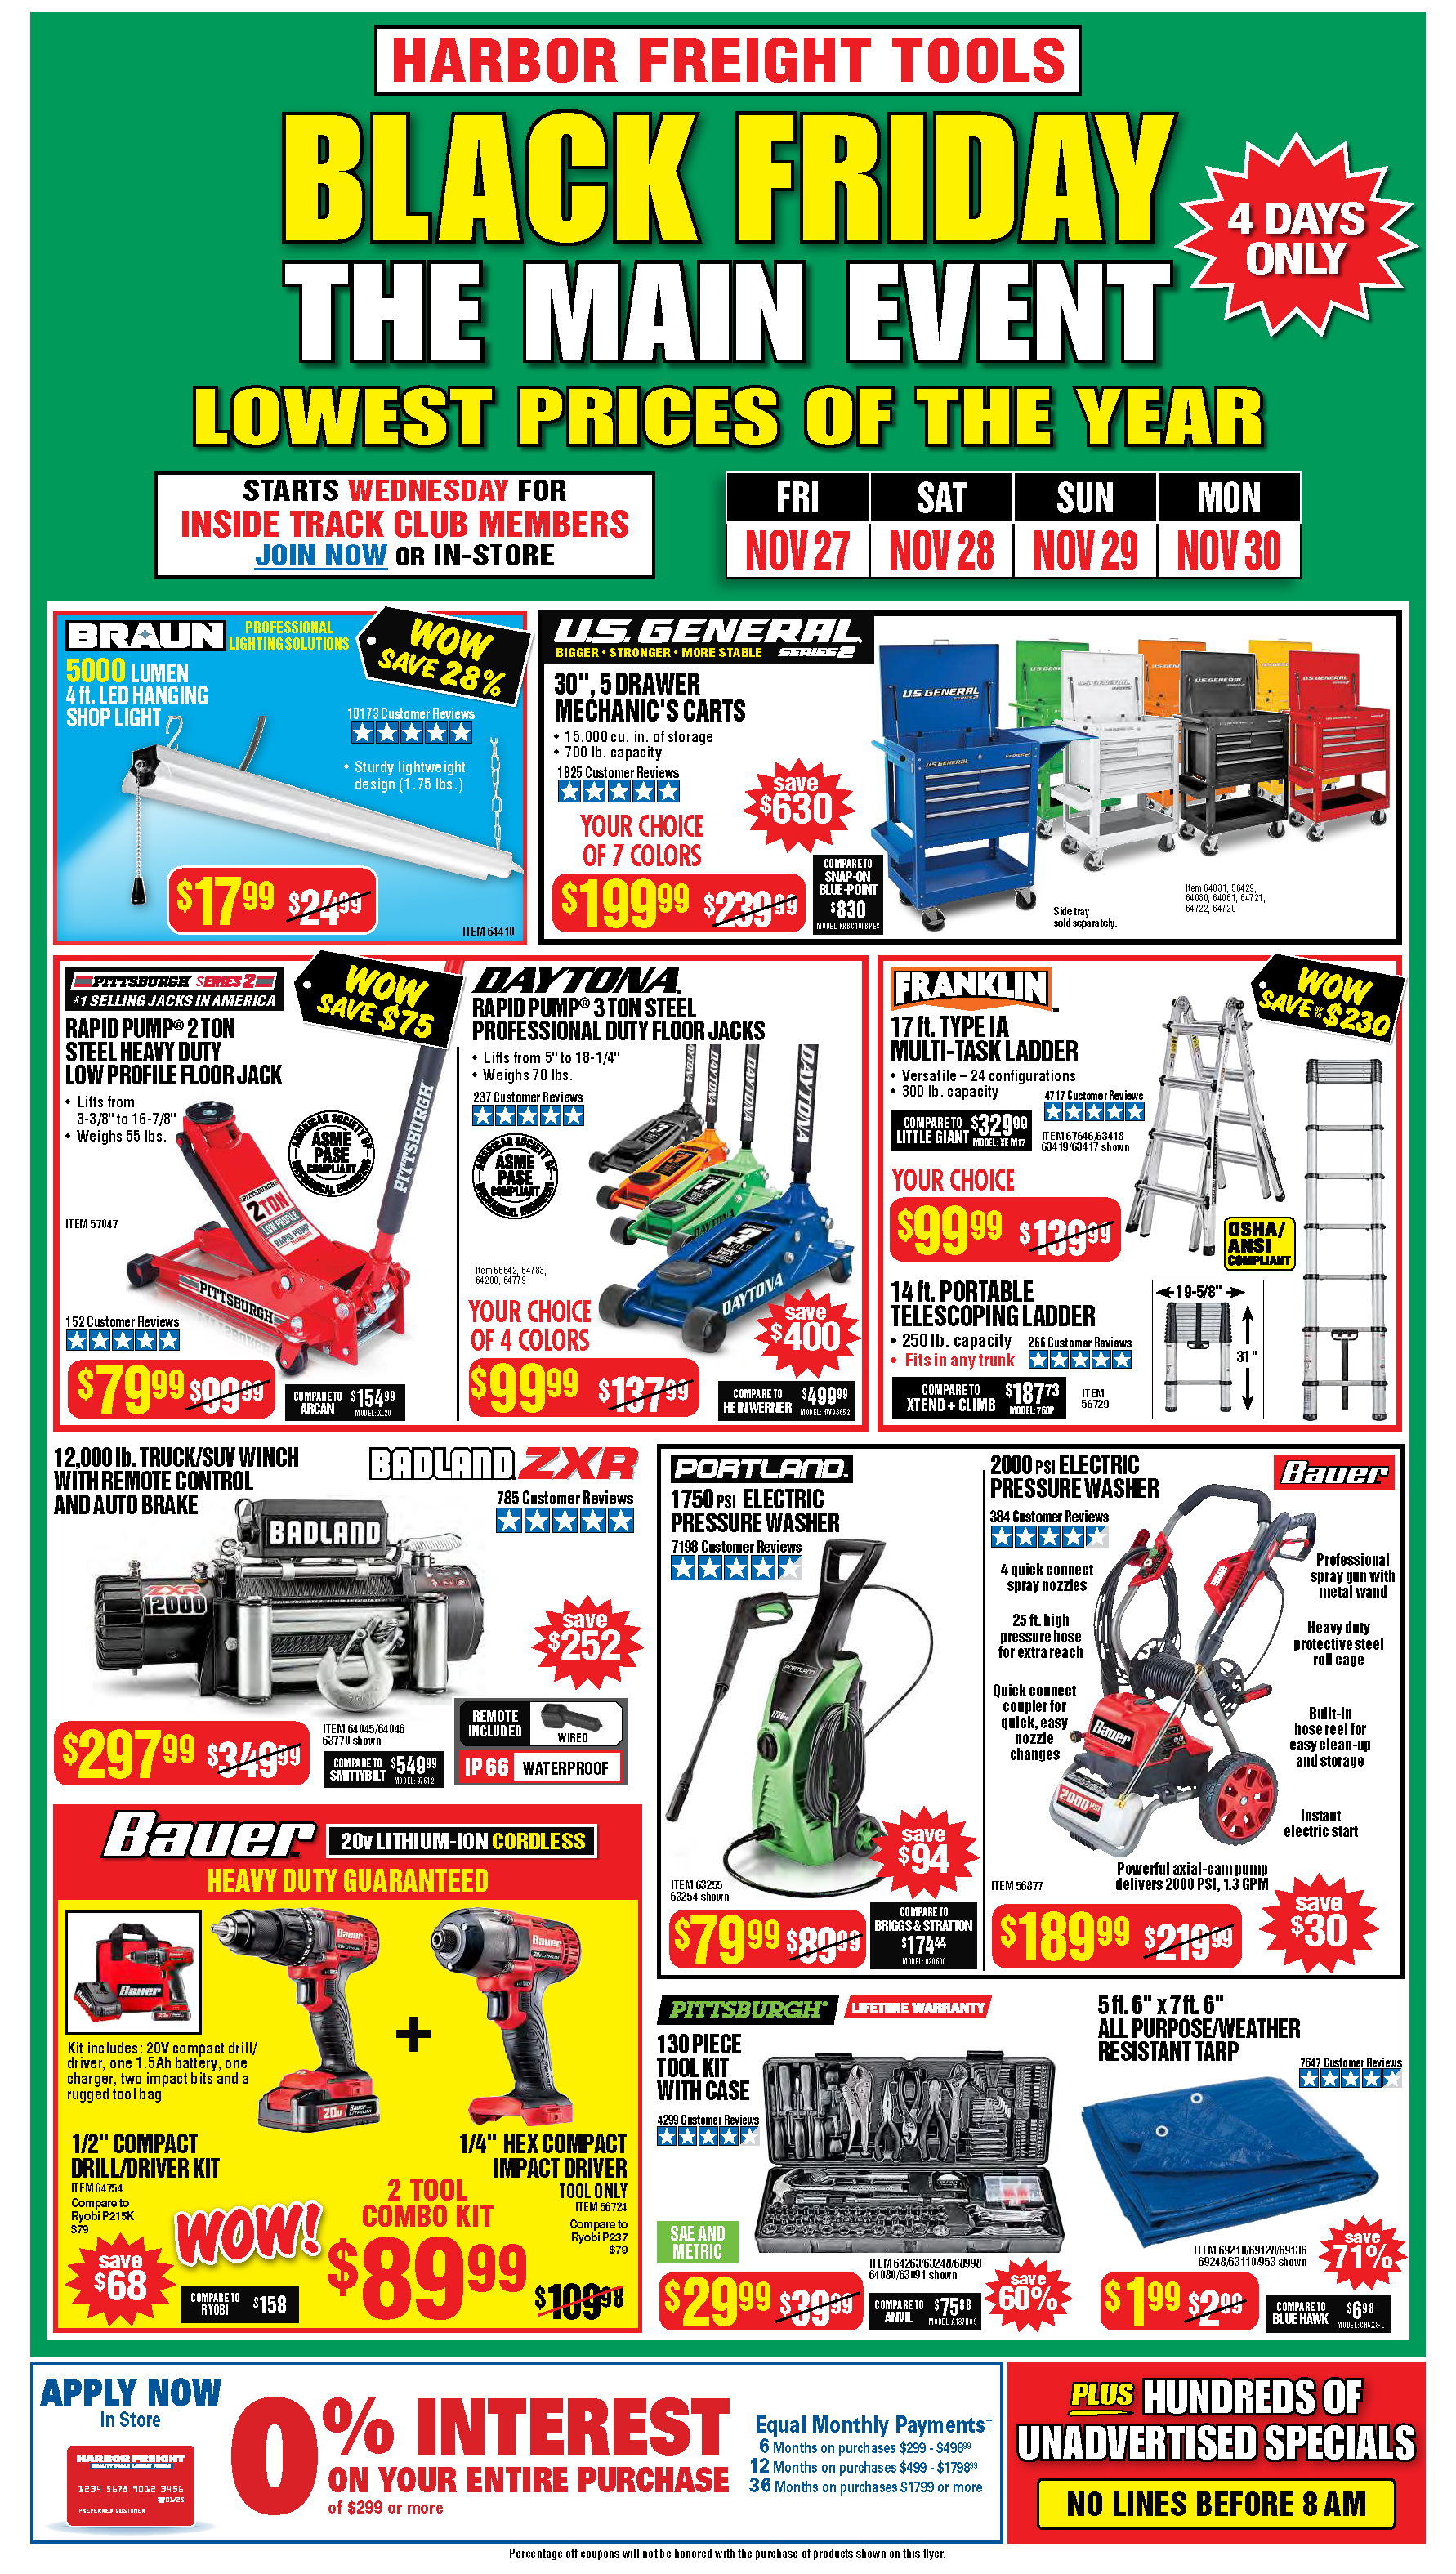 Harbor Freight 2020 Black Friday Ad – Harbor Freight Coupons